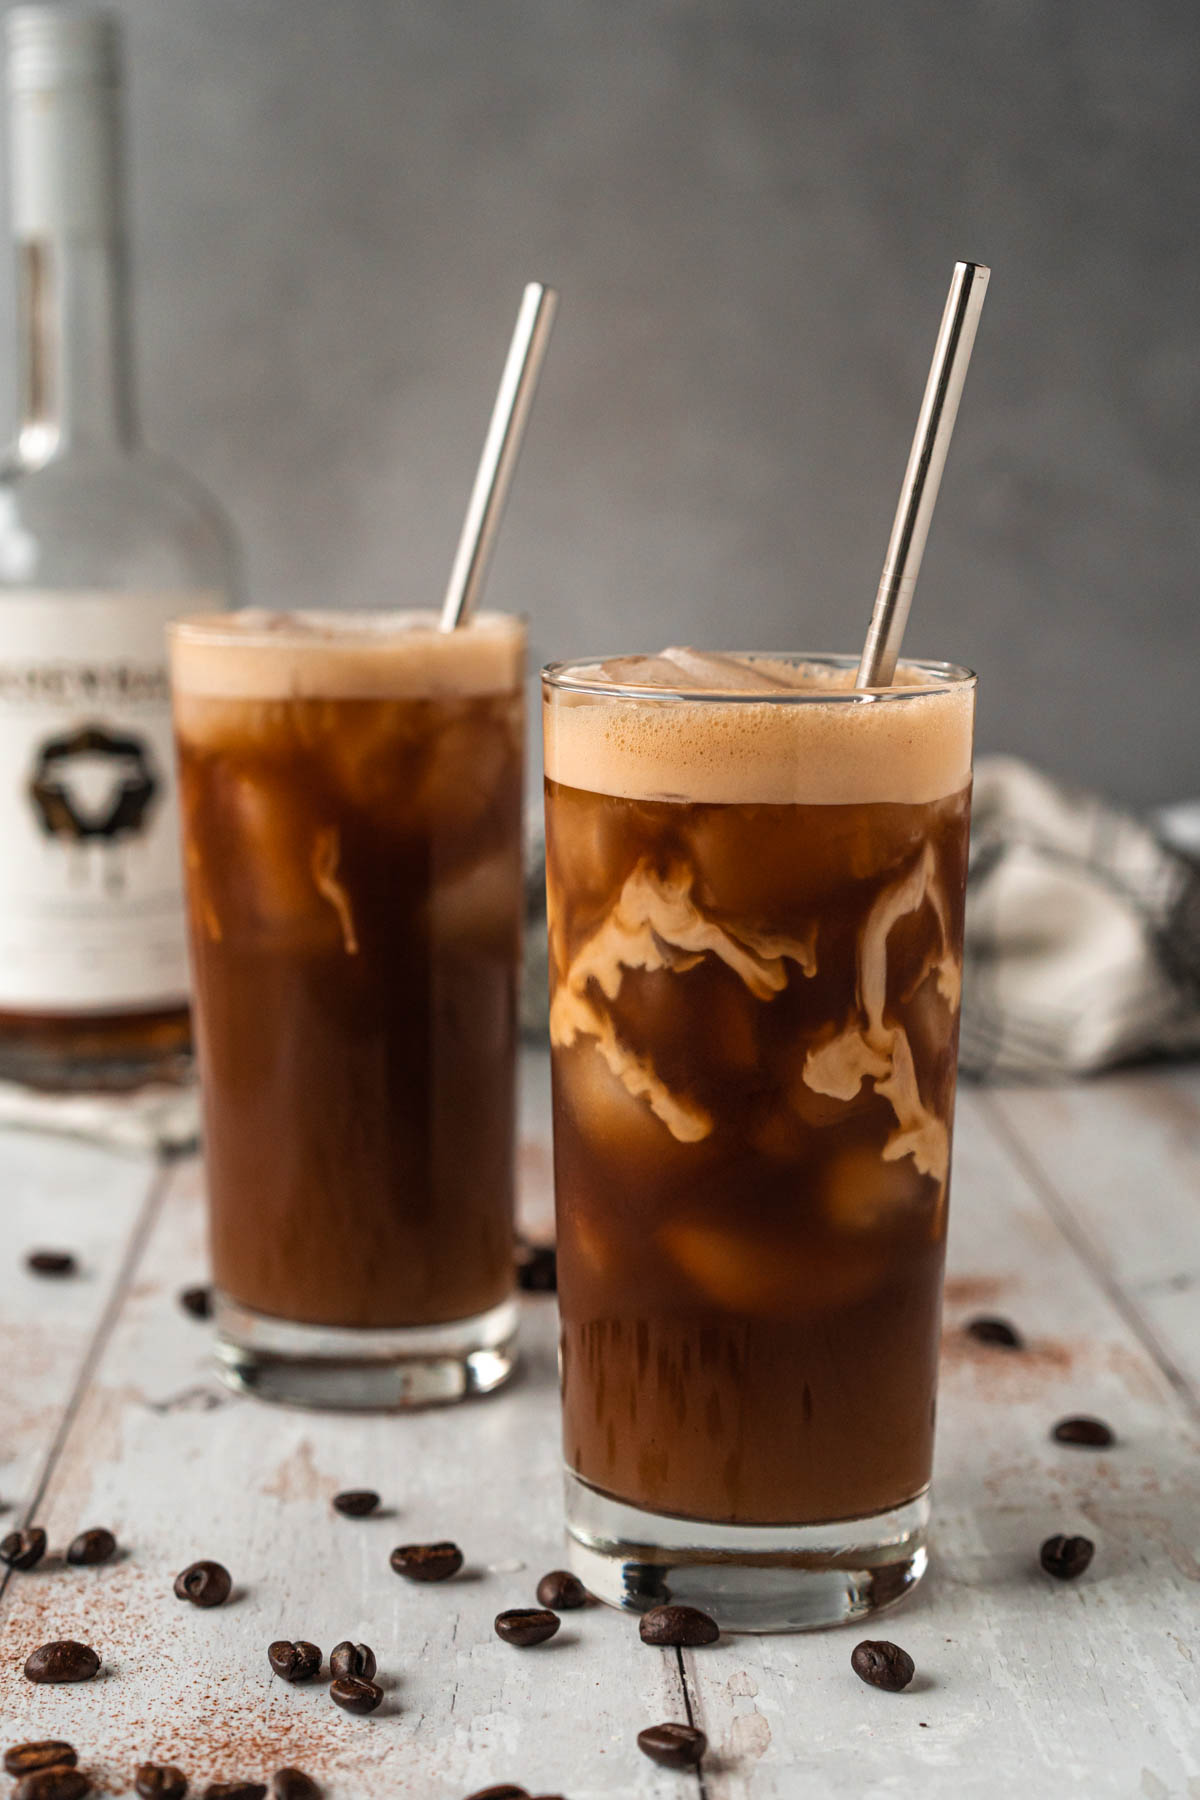 Side-view photo of two tall glasses filled with iced coffee and cream cascading down from the top. A bottle of peanut butter whiskey is blurred in the background